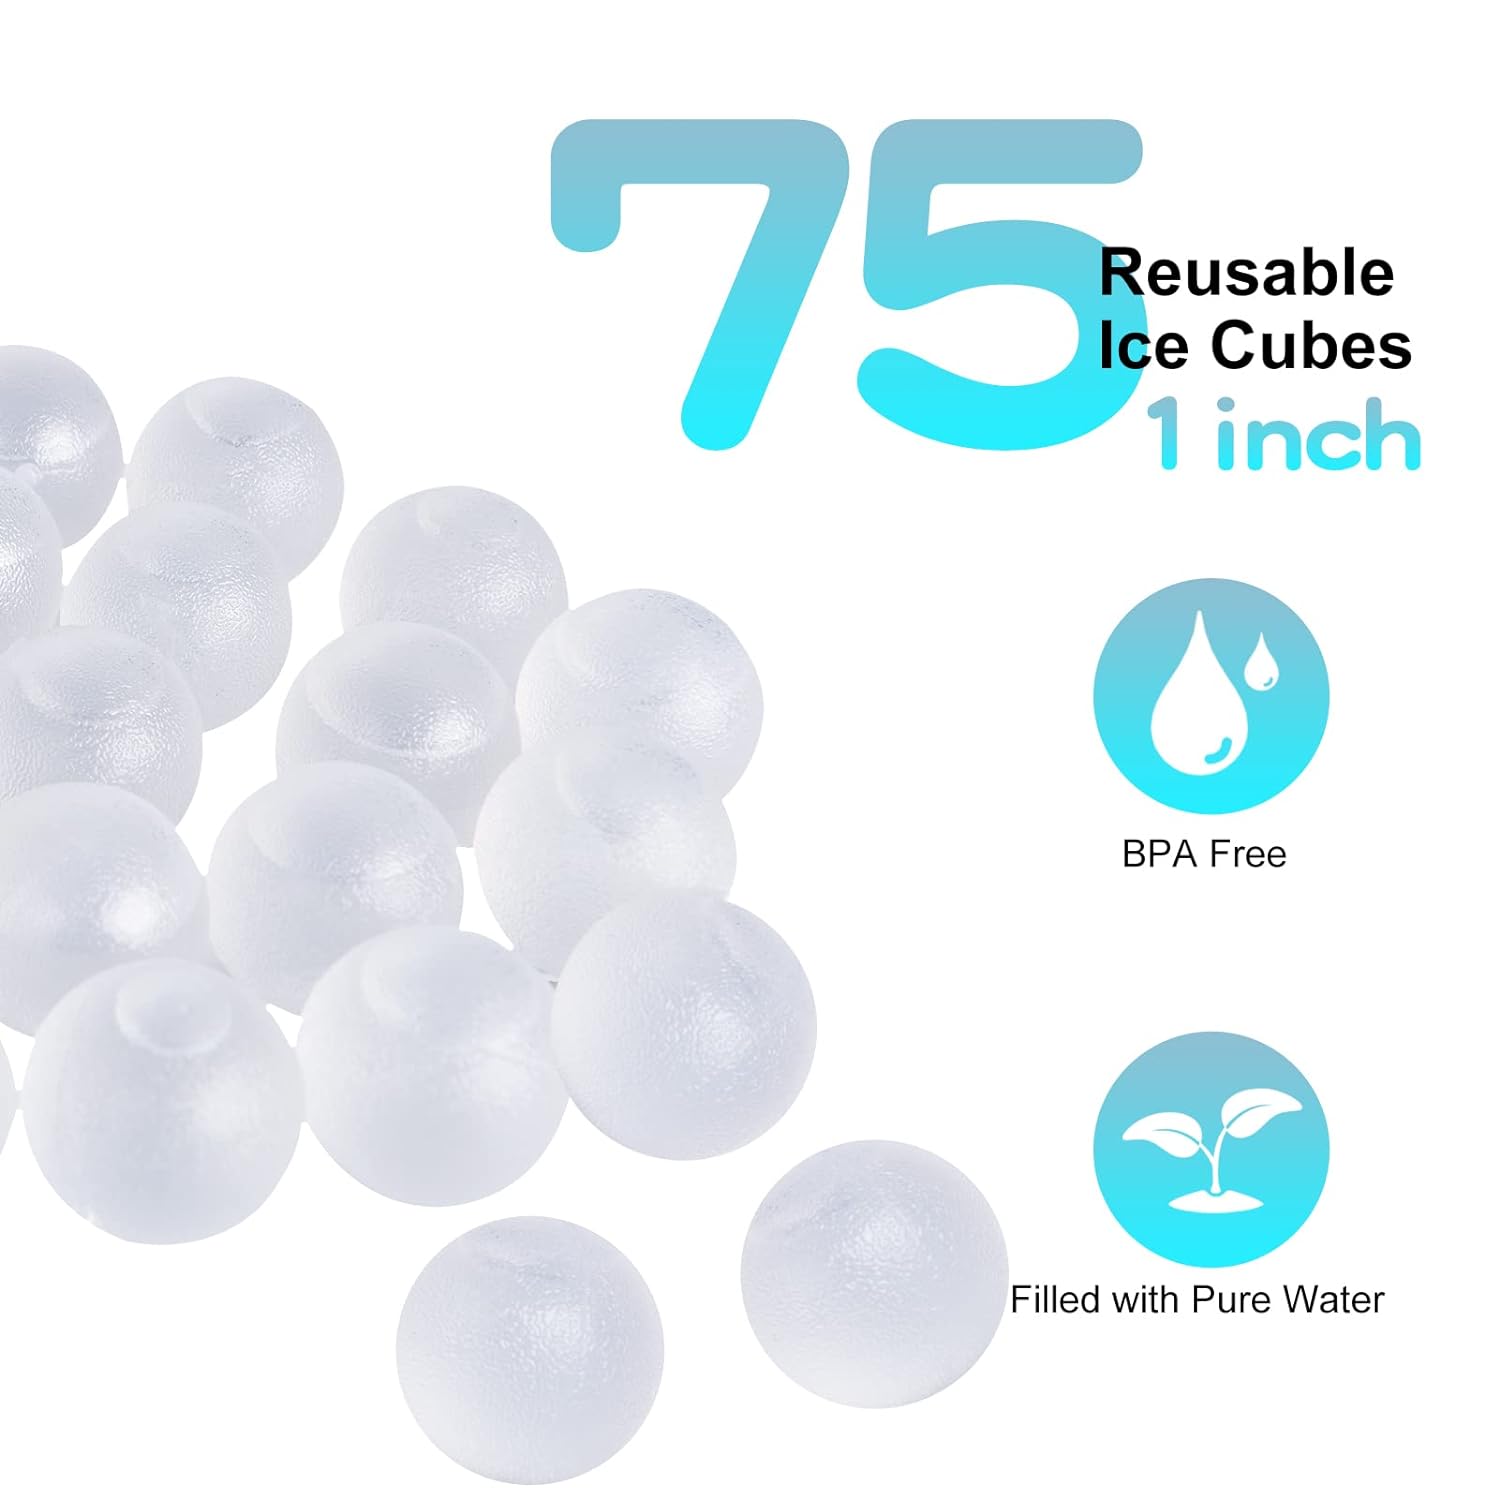 thinkstar Reusable Ice Cube, 75 Pack Plastic Round Ice Cube For Drinks Refreezable Bpa Free, Washable Permanent Ice Ball For Cocktail…